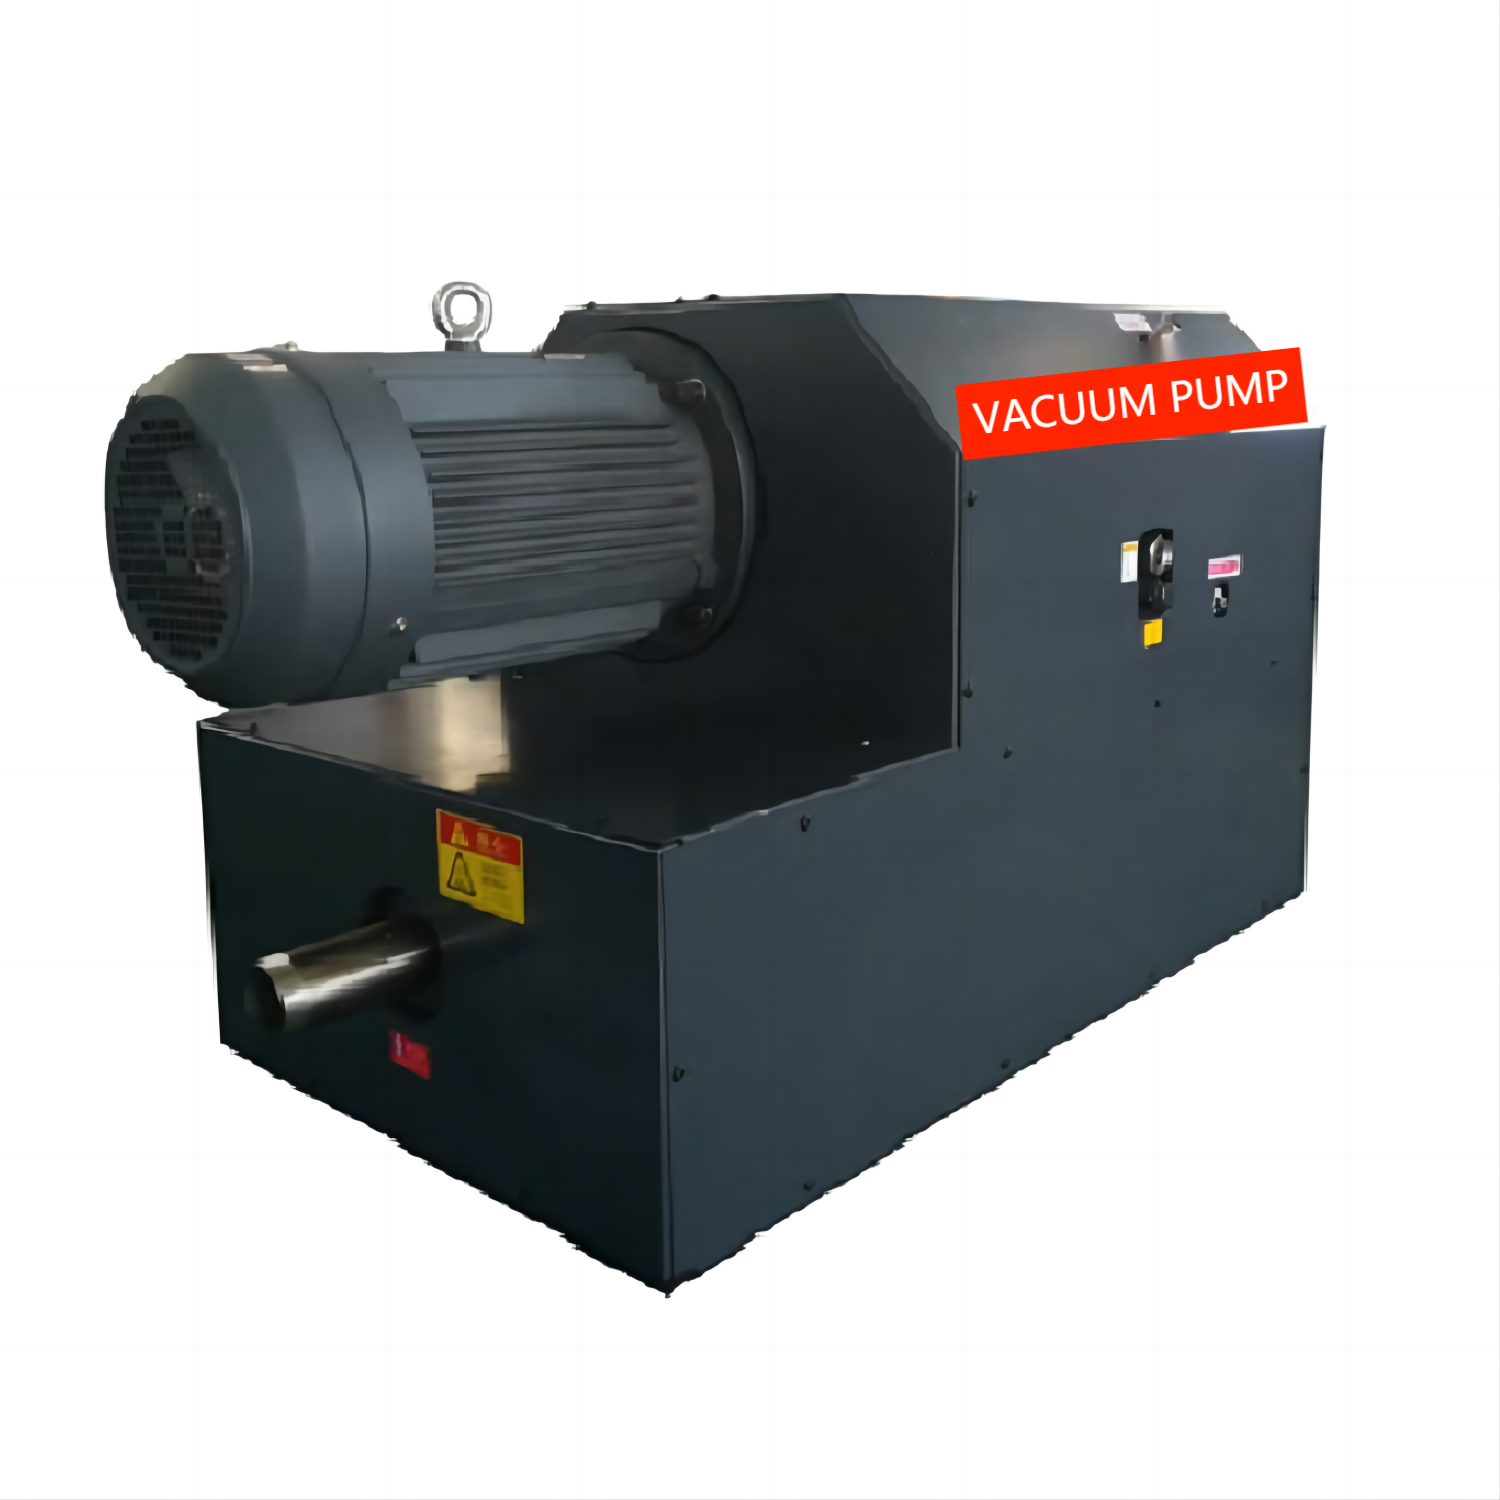 650m3/h Oil Free Dry Claw Vacuum Pump Air Cooling / Water Cooling Use for Hospital